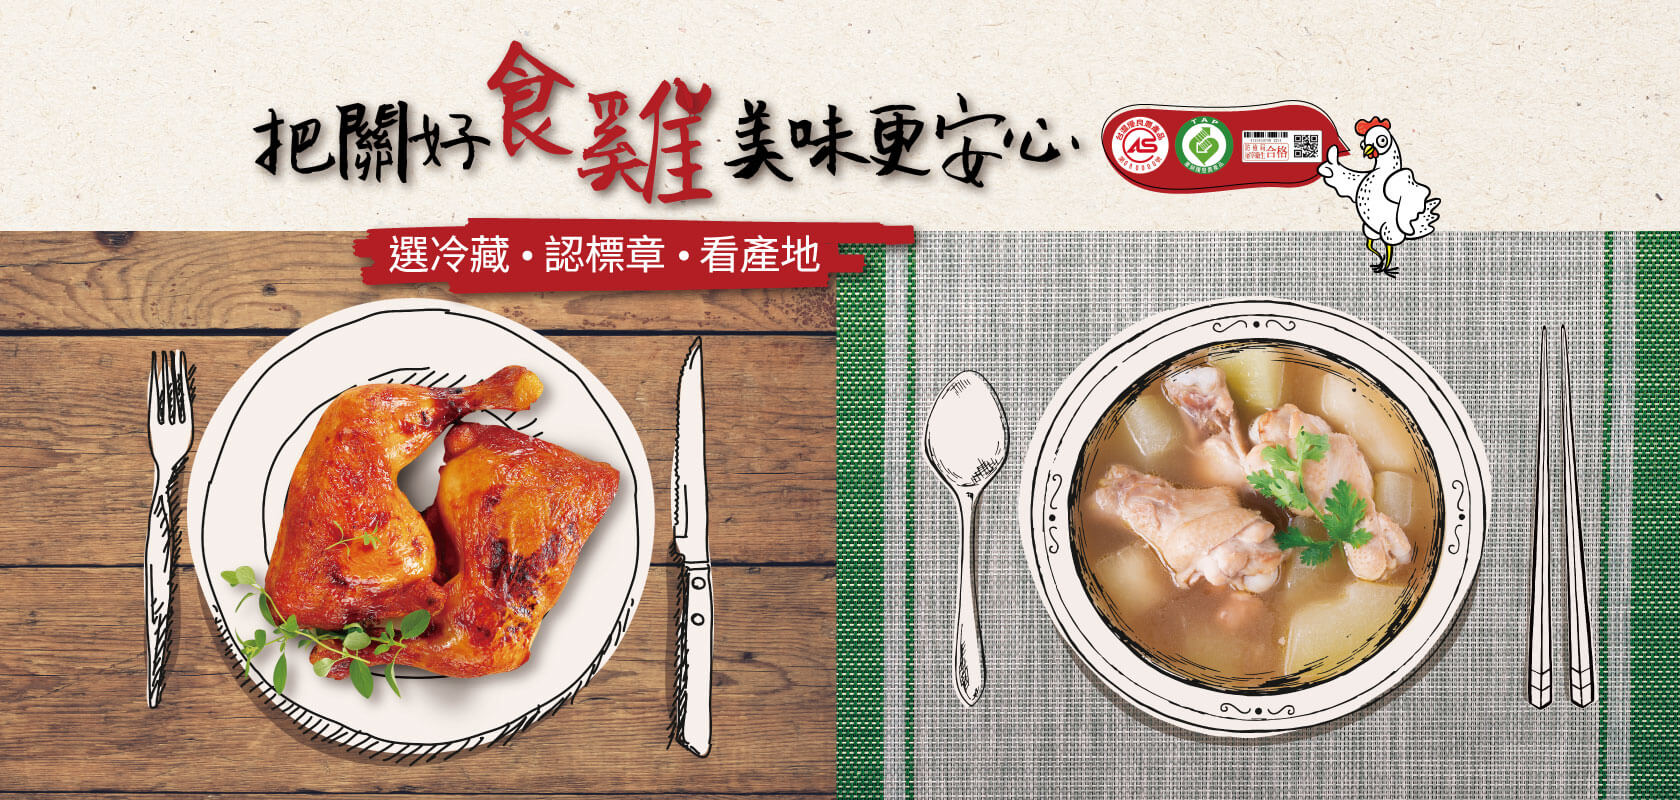 Promotion of Taiwanese chickens